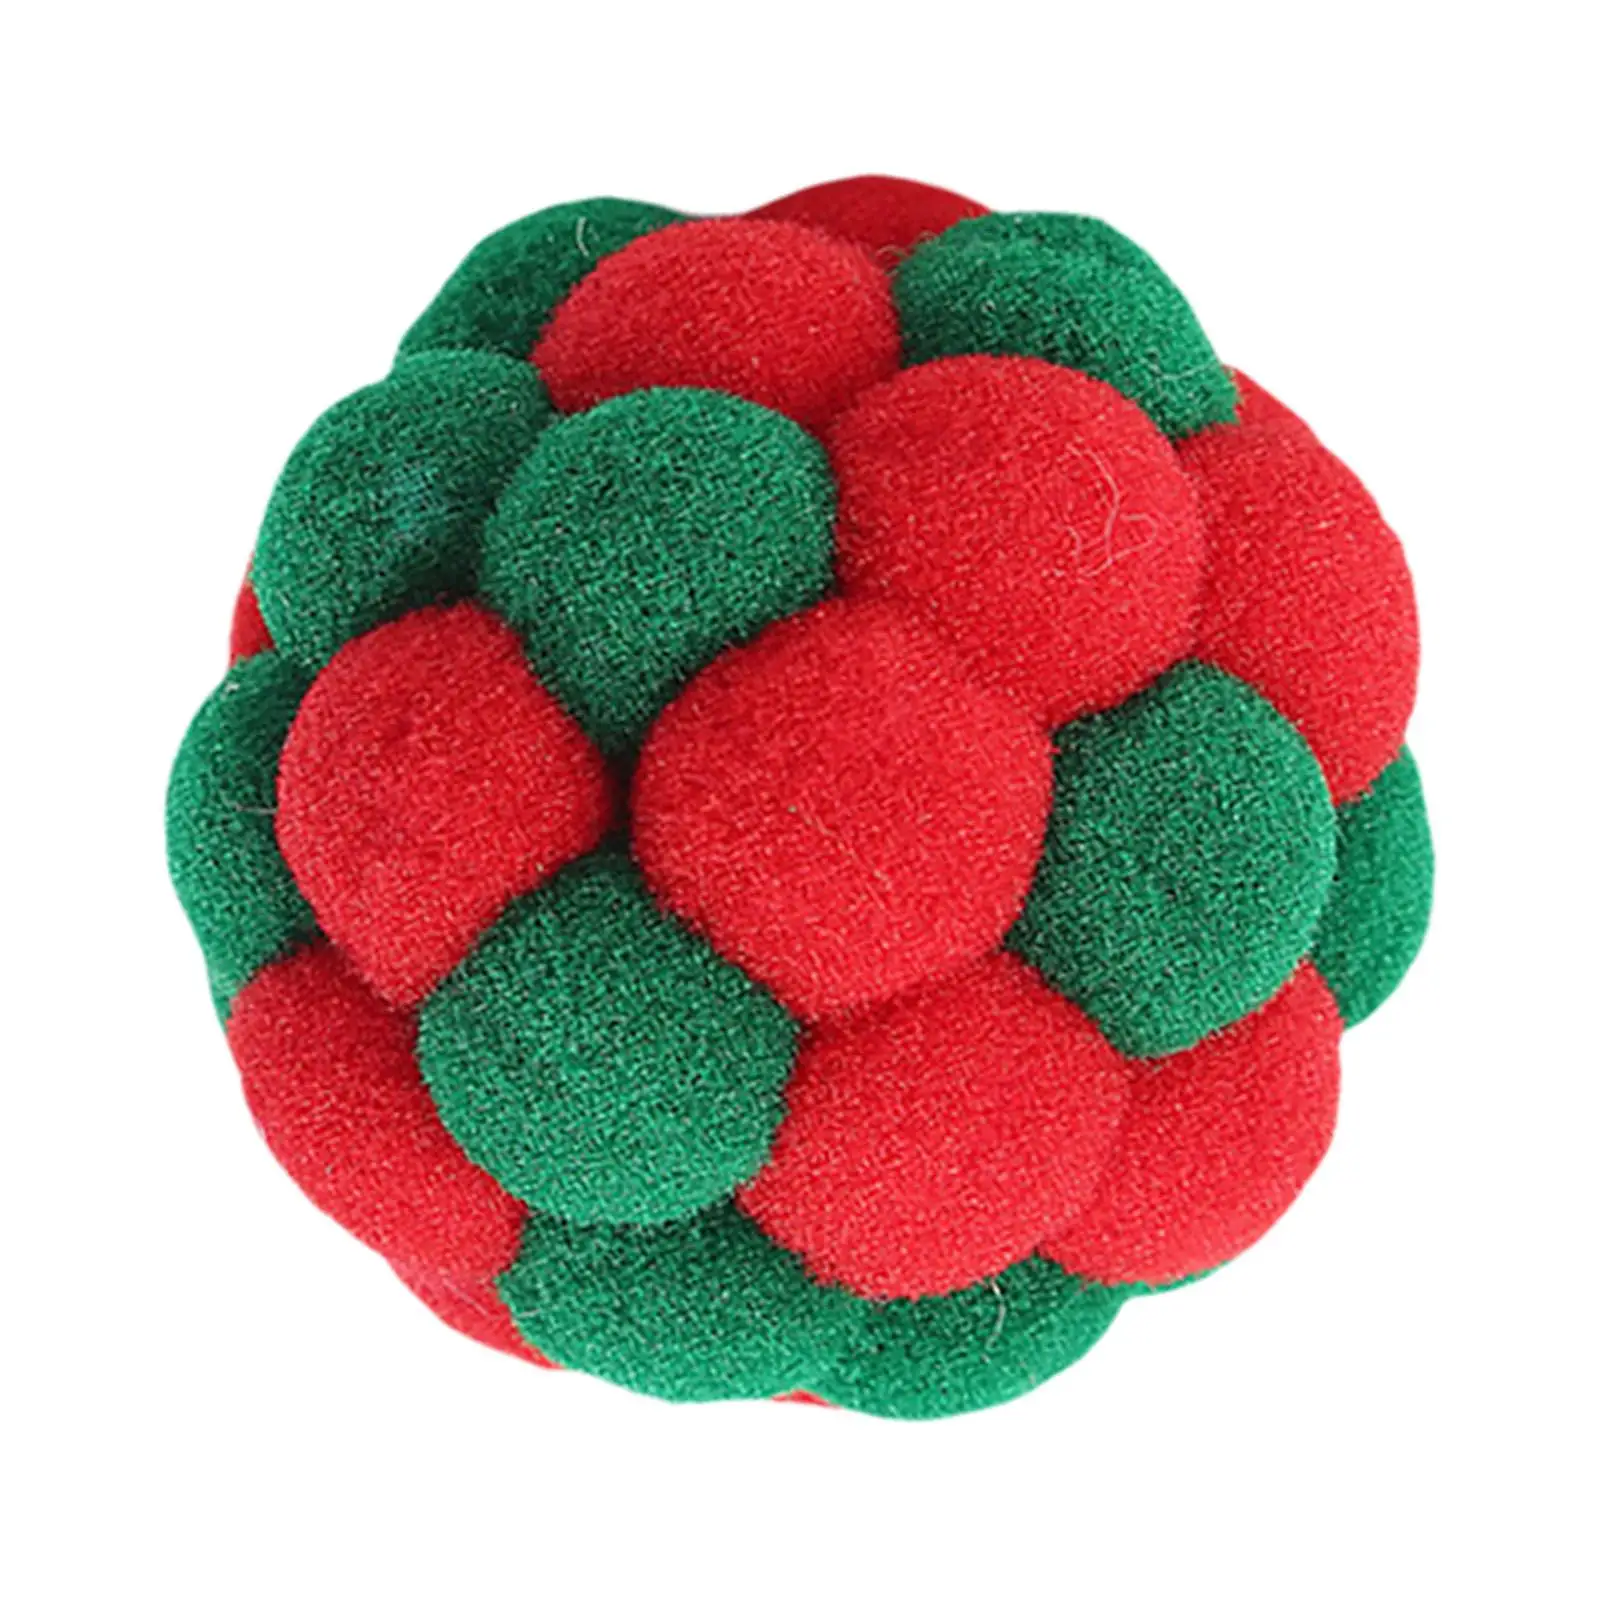 Plush Interactive Cat Toys KICKER Toys Funny Sounds with Bells Chirping Balls Cat Soft Toy Balls for Puppy Kitten Kitty Exercise